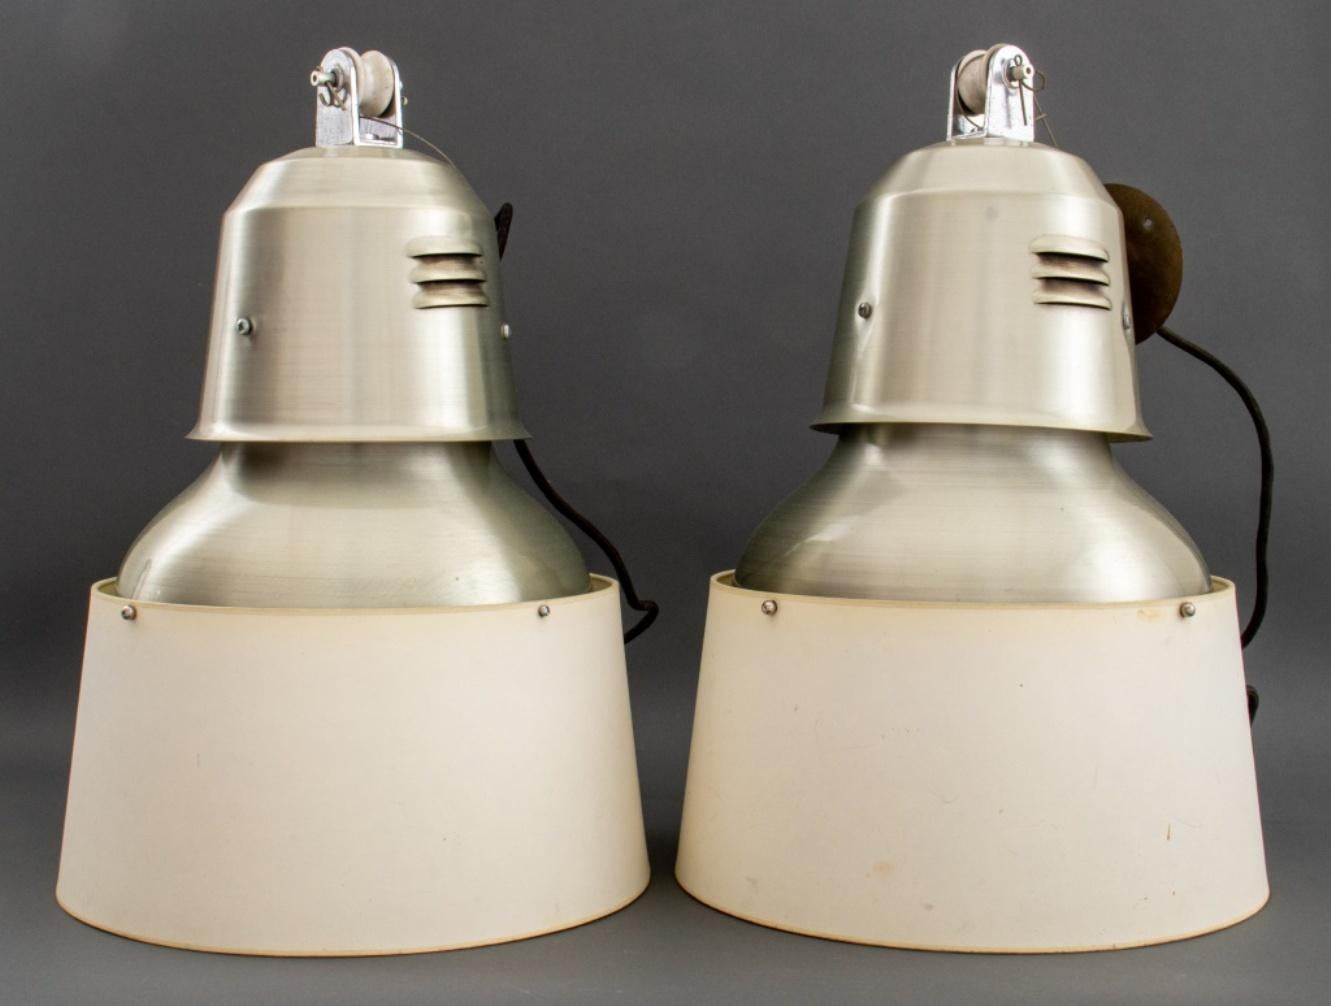 Christian Liaigre (French, 1943-2020) Mercer Kitchen (designed 1997) stainless steel industrial pendant lights with custom paper shades by Liaigre, featuring a conical form with white porcelain pulleys, and circular shades. 24